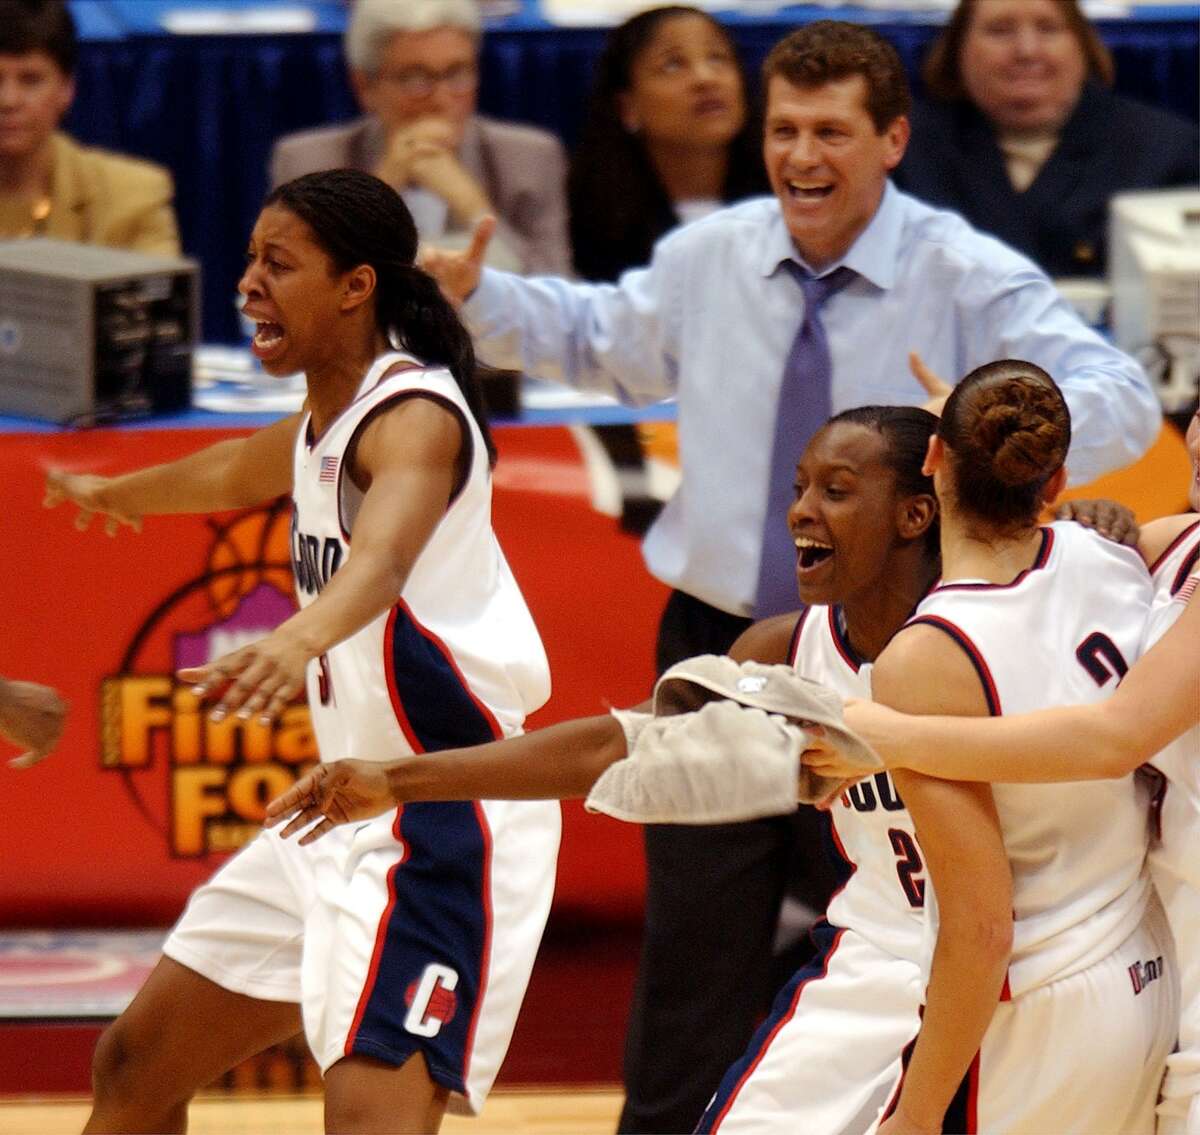 Jessica Moore, from left, head coach Geno Auriemma, Ashley Battle and Diana Taurasi rush the court as time expires against OU at the Alamodome in San Antonio Sunday, March 31, 2002. UConn won 82-70 for the national championship. BAHRAM MARK SOBHANI/STAFF